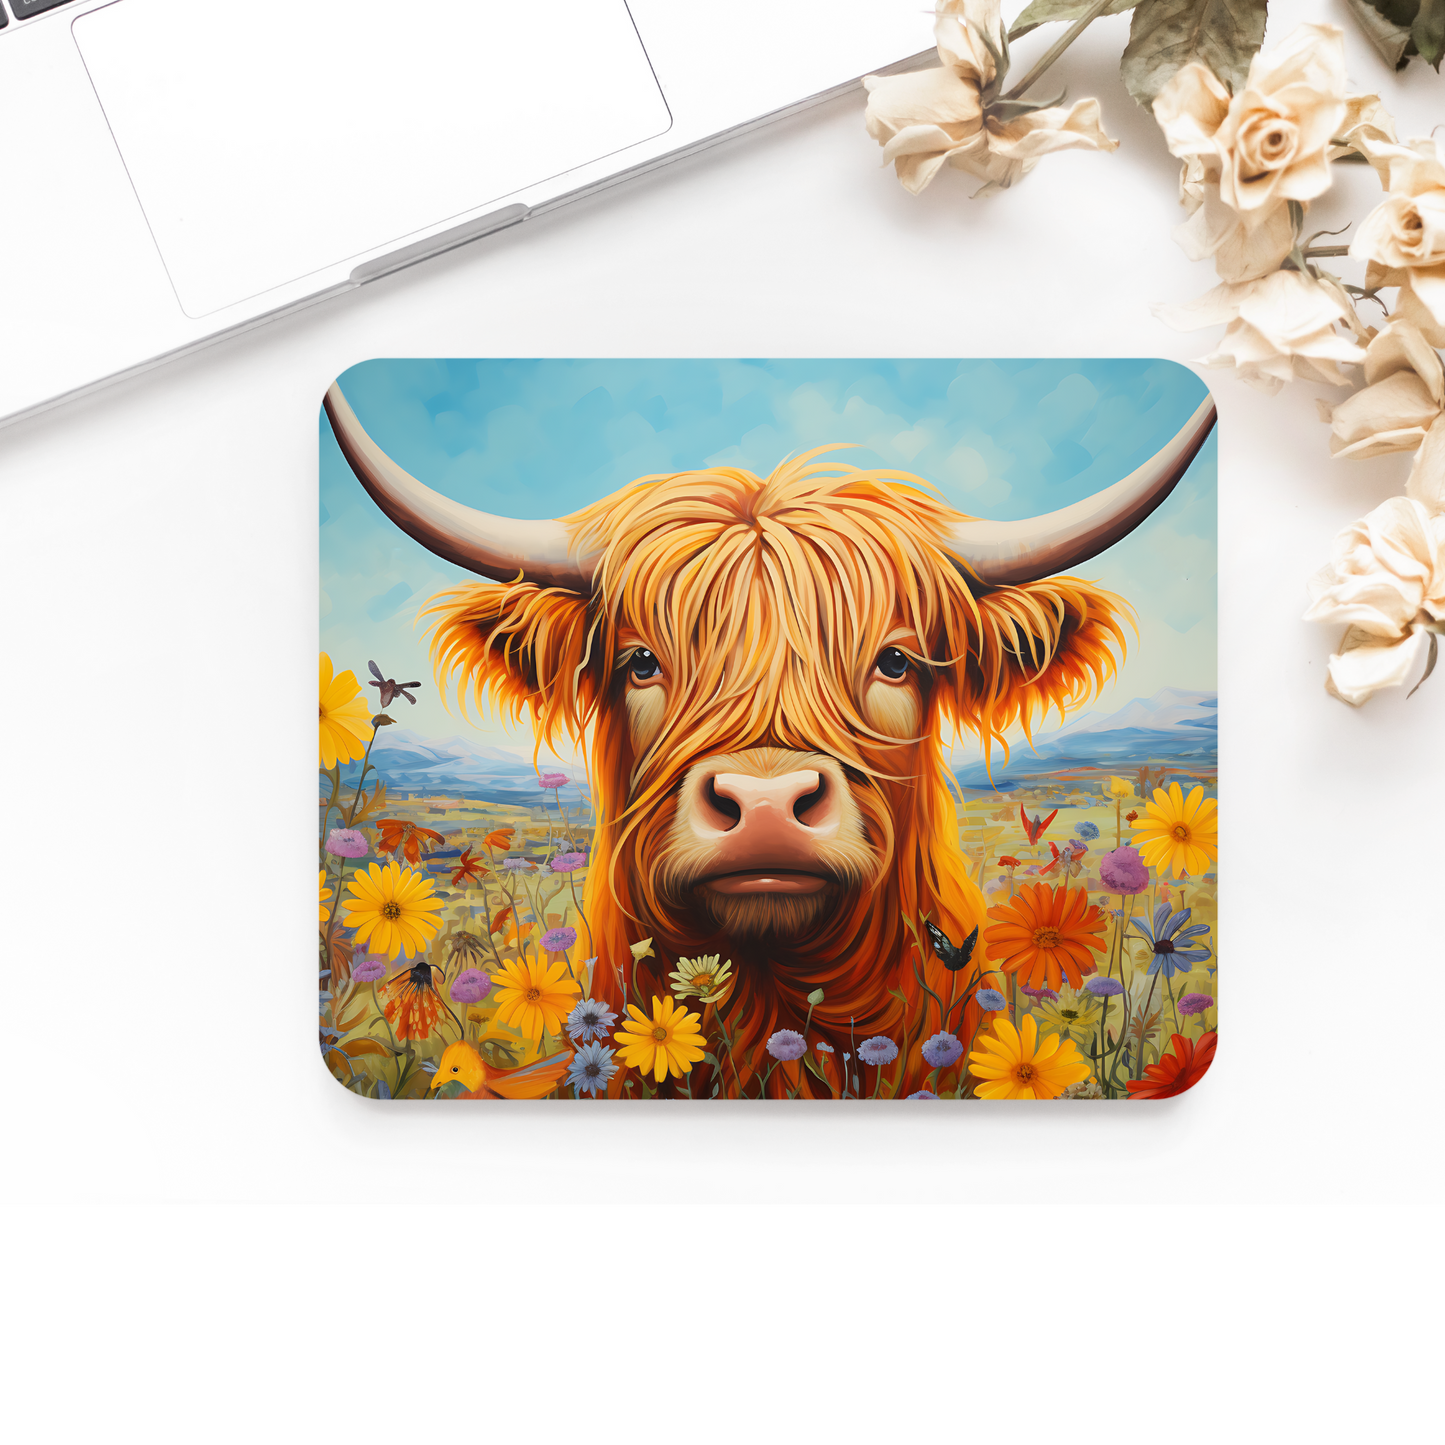 Premium Printed Anti-Slip Mouse Mat - Ultra Durable Highland Cow In Field Of Flowers Design